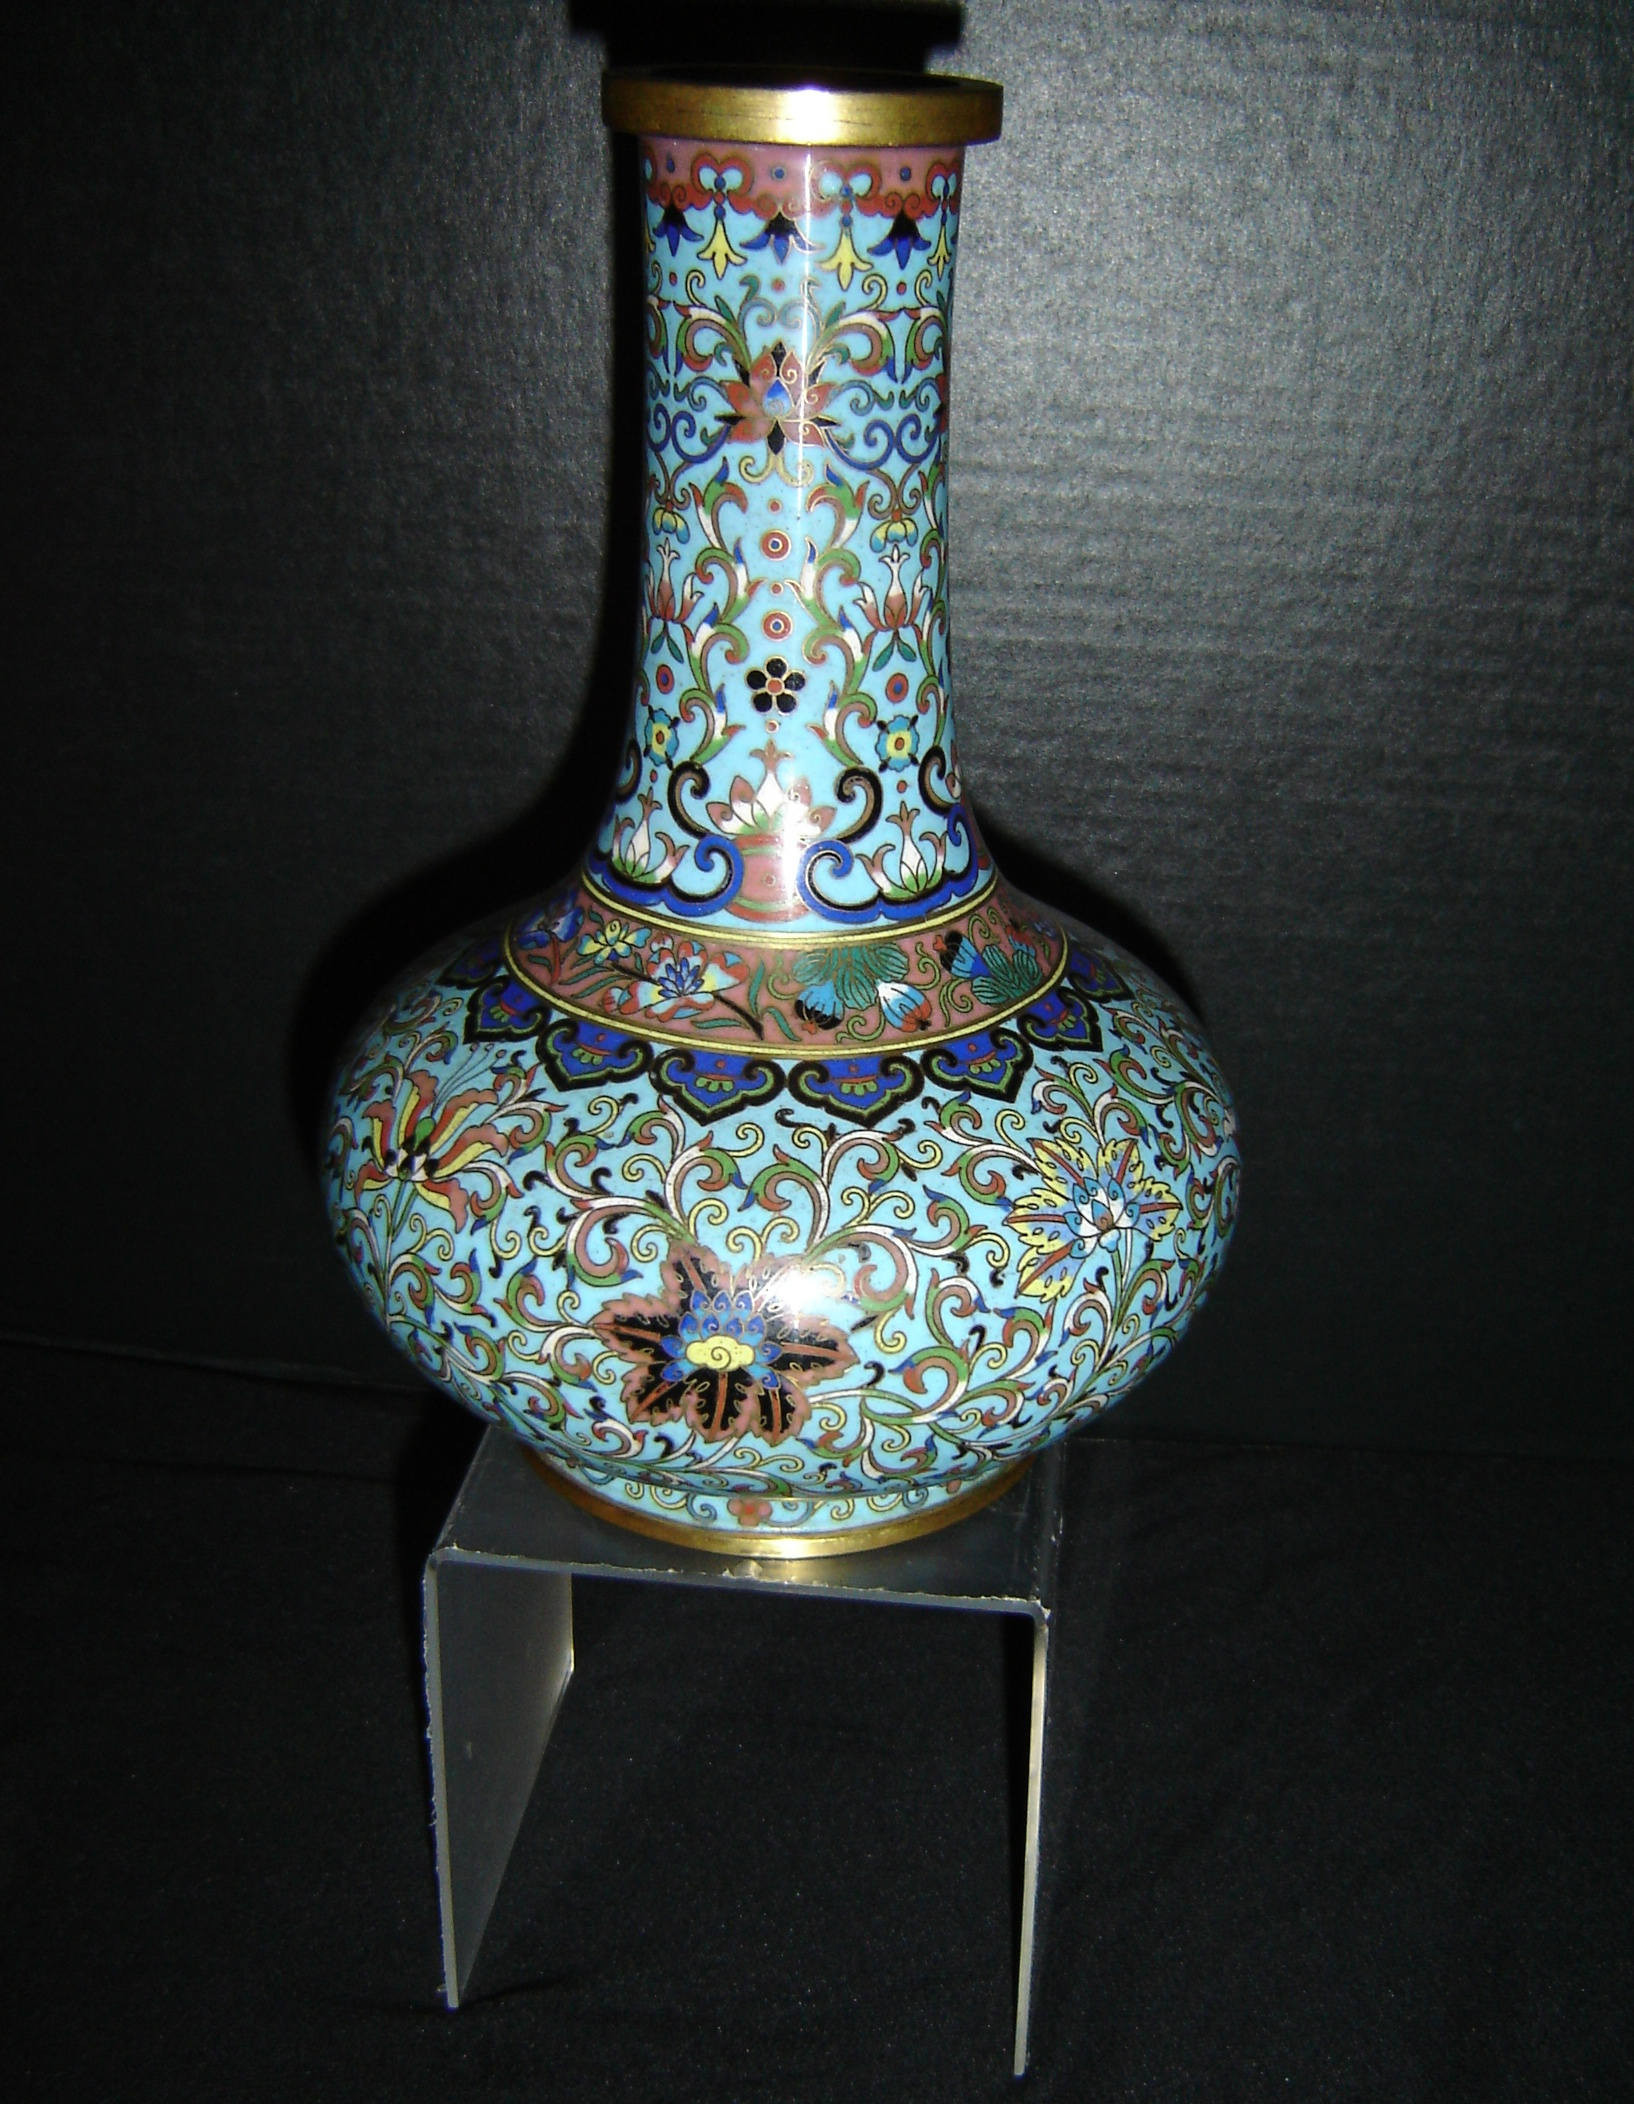 qing dynasty vase of antique chinese imperial qing dynasty small cloisonne enamel in dzoom